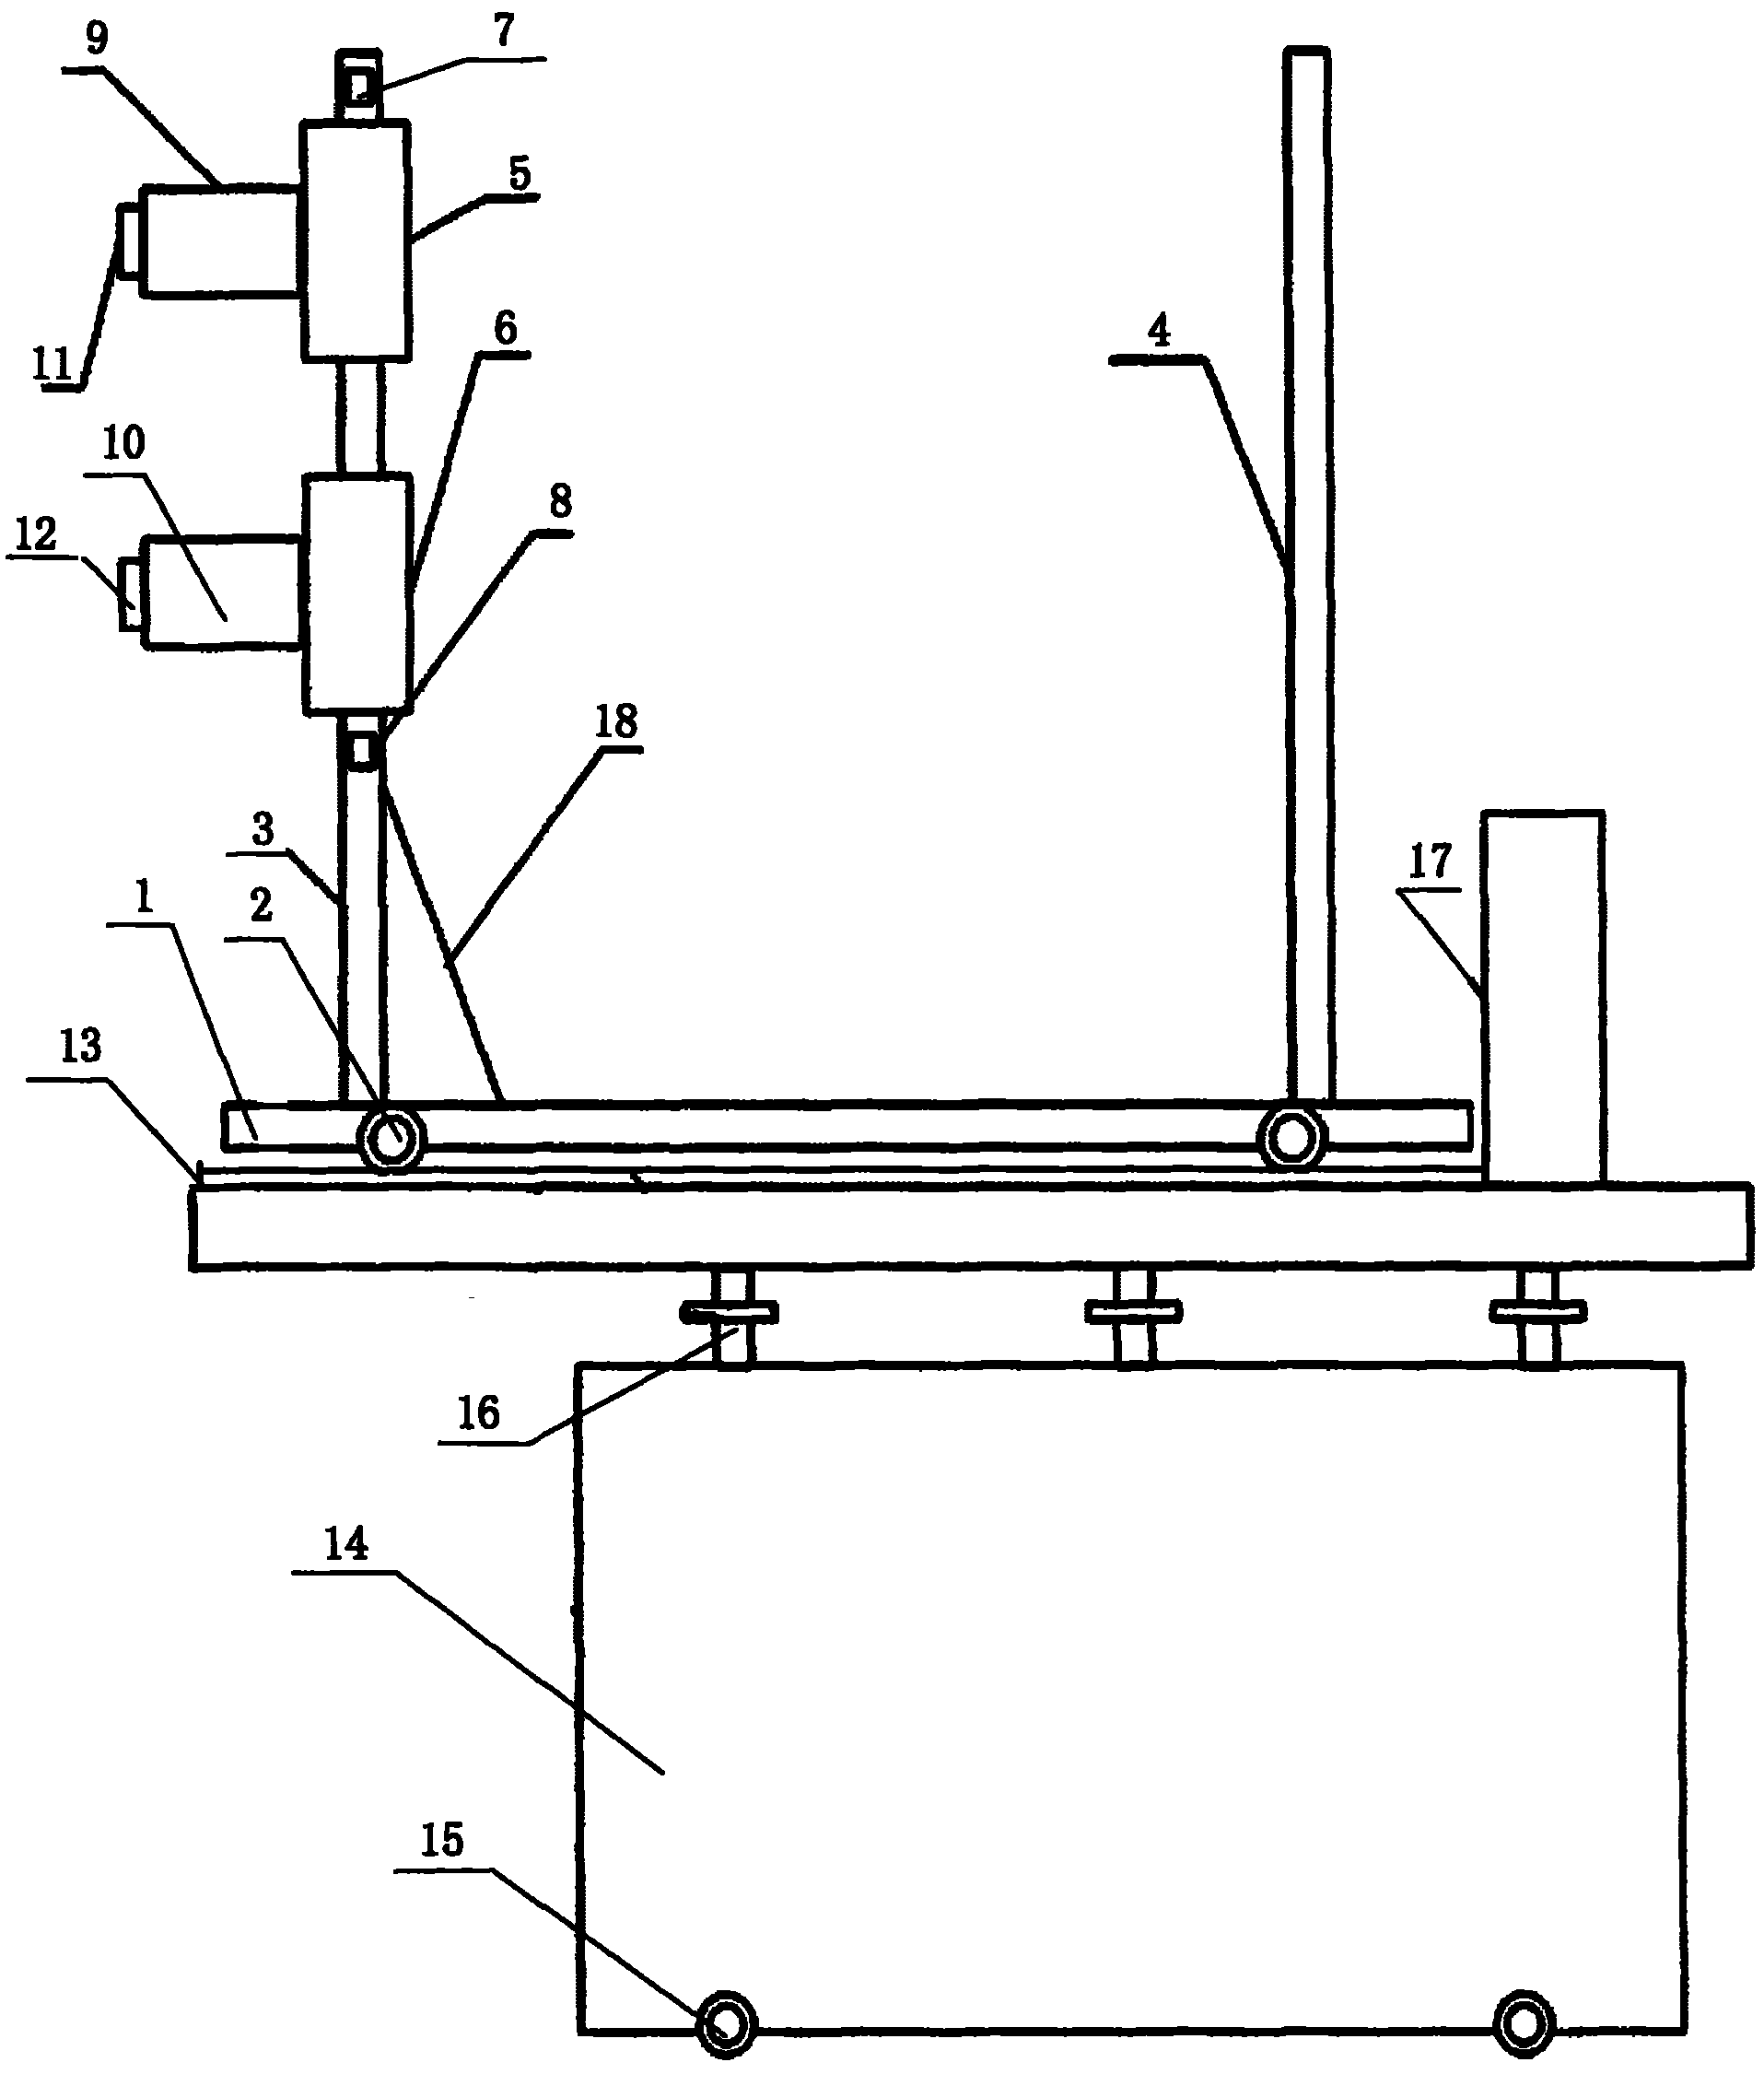 A device for simulating the running state of handcart switchgear